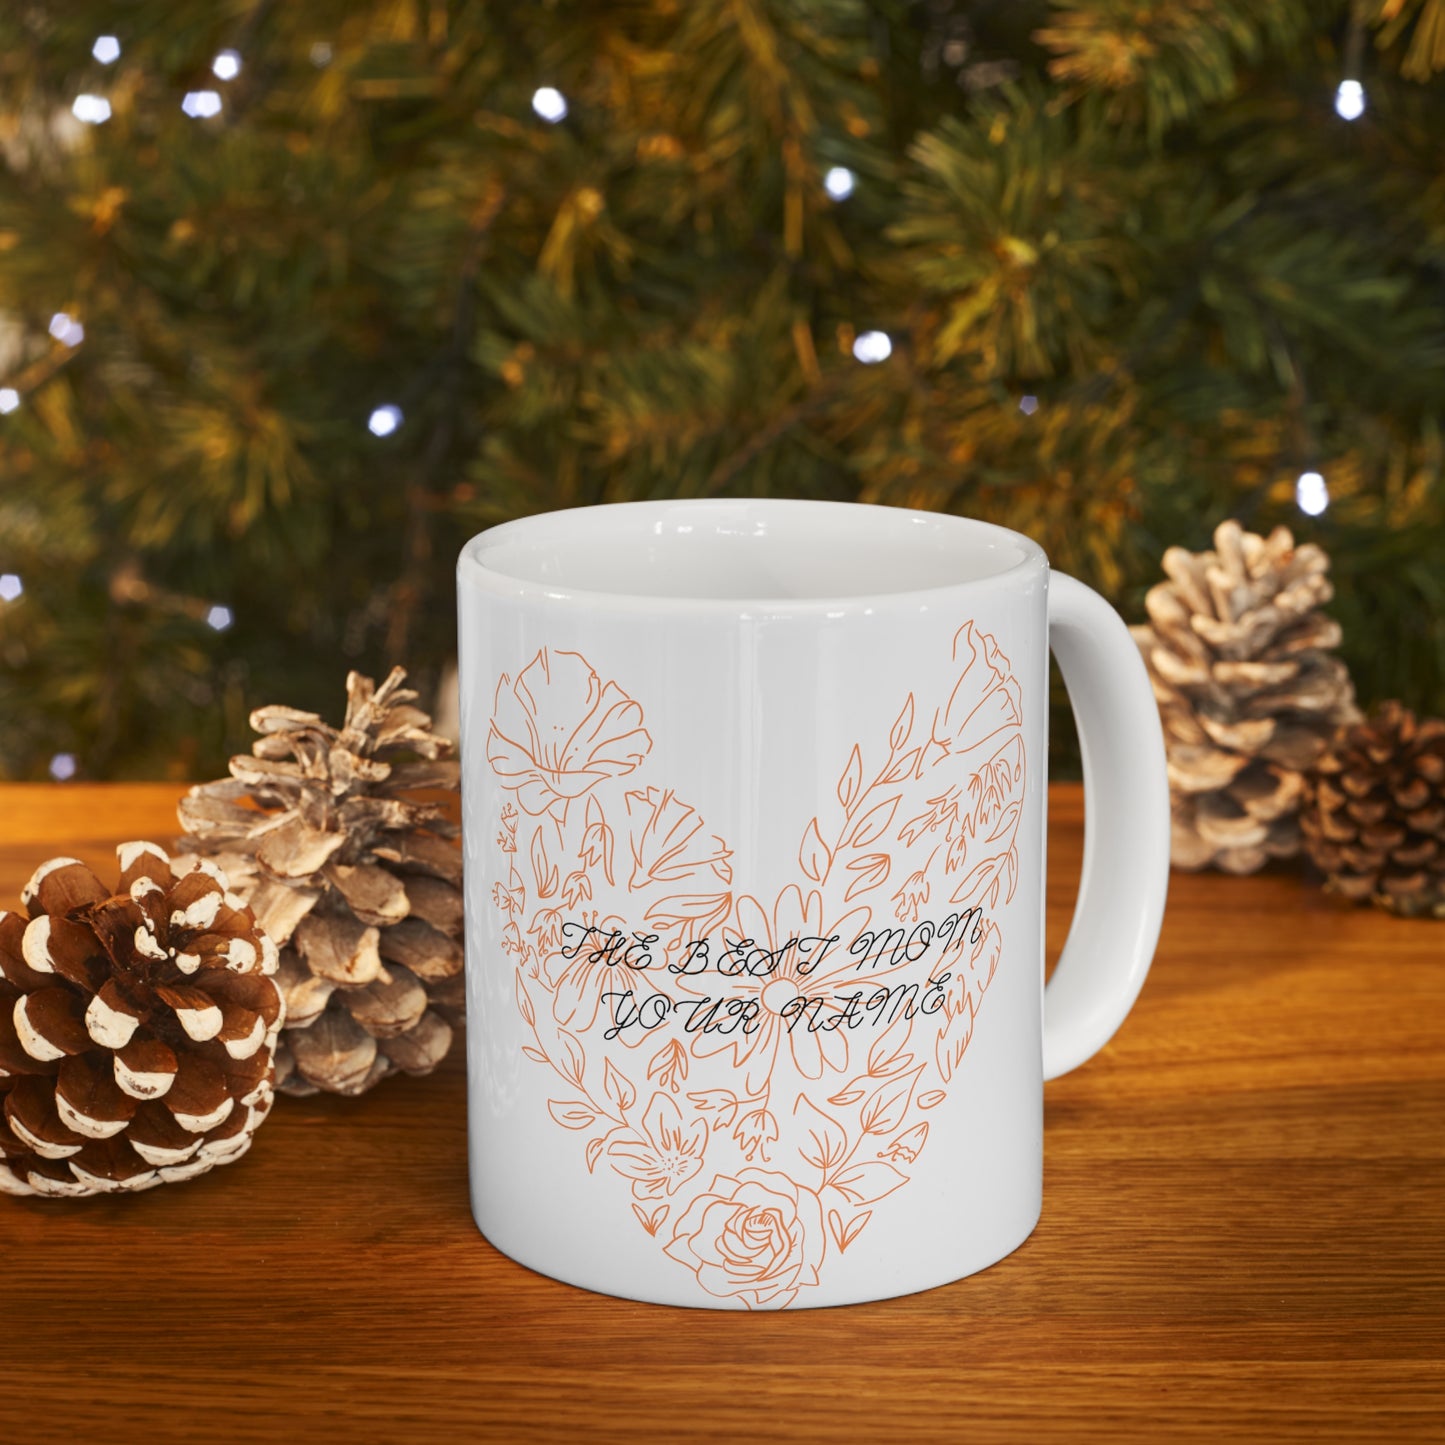 A Perfect Gift for Moms, a Personalized Mug, a Love that lasts, An Example of Unconditional Love;The Beating Heart of a Mom